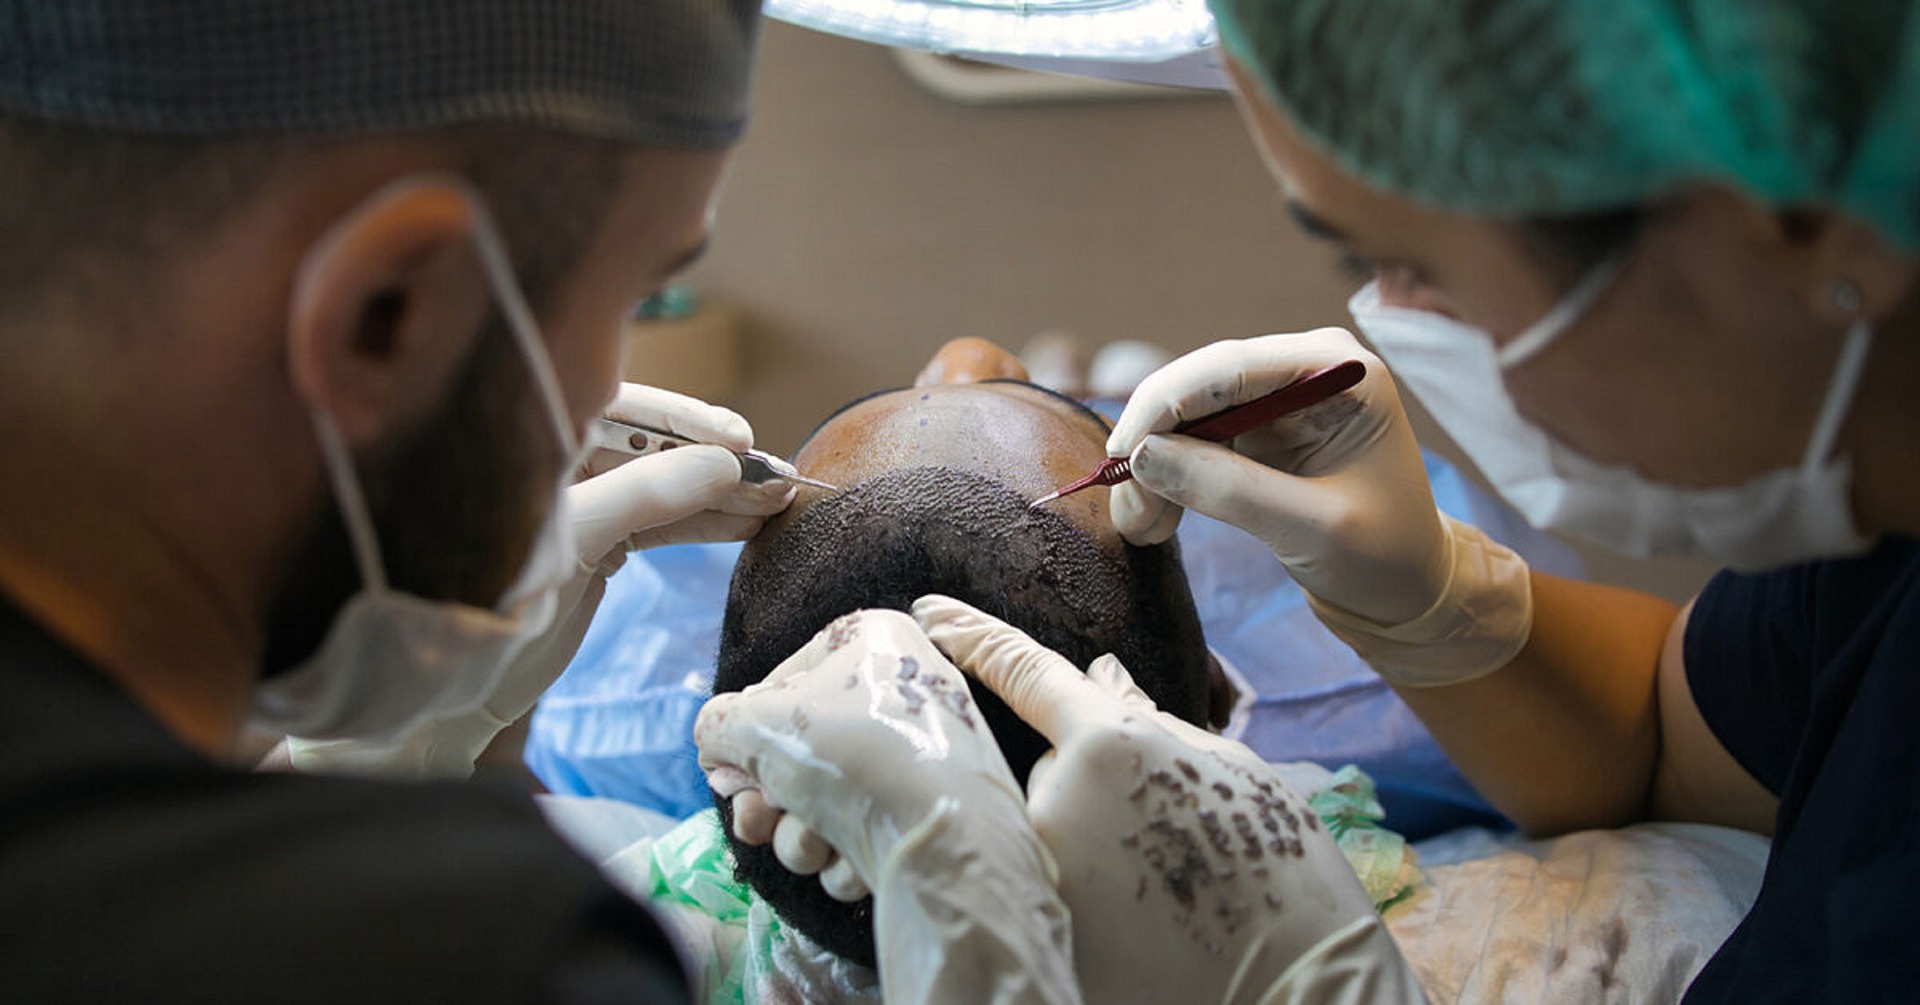 Medical professionals doing a hair transplant.